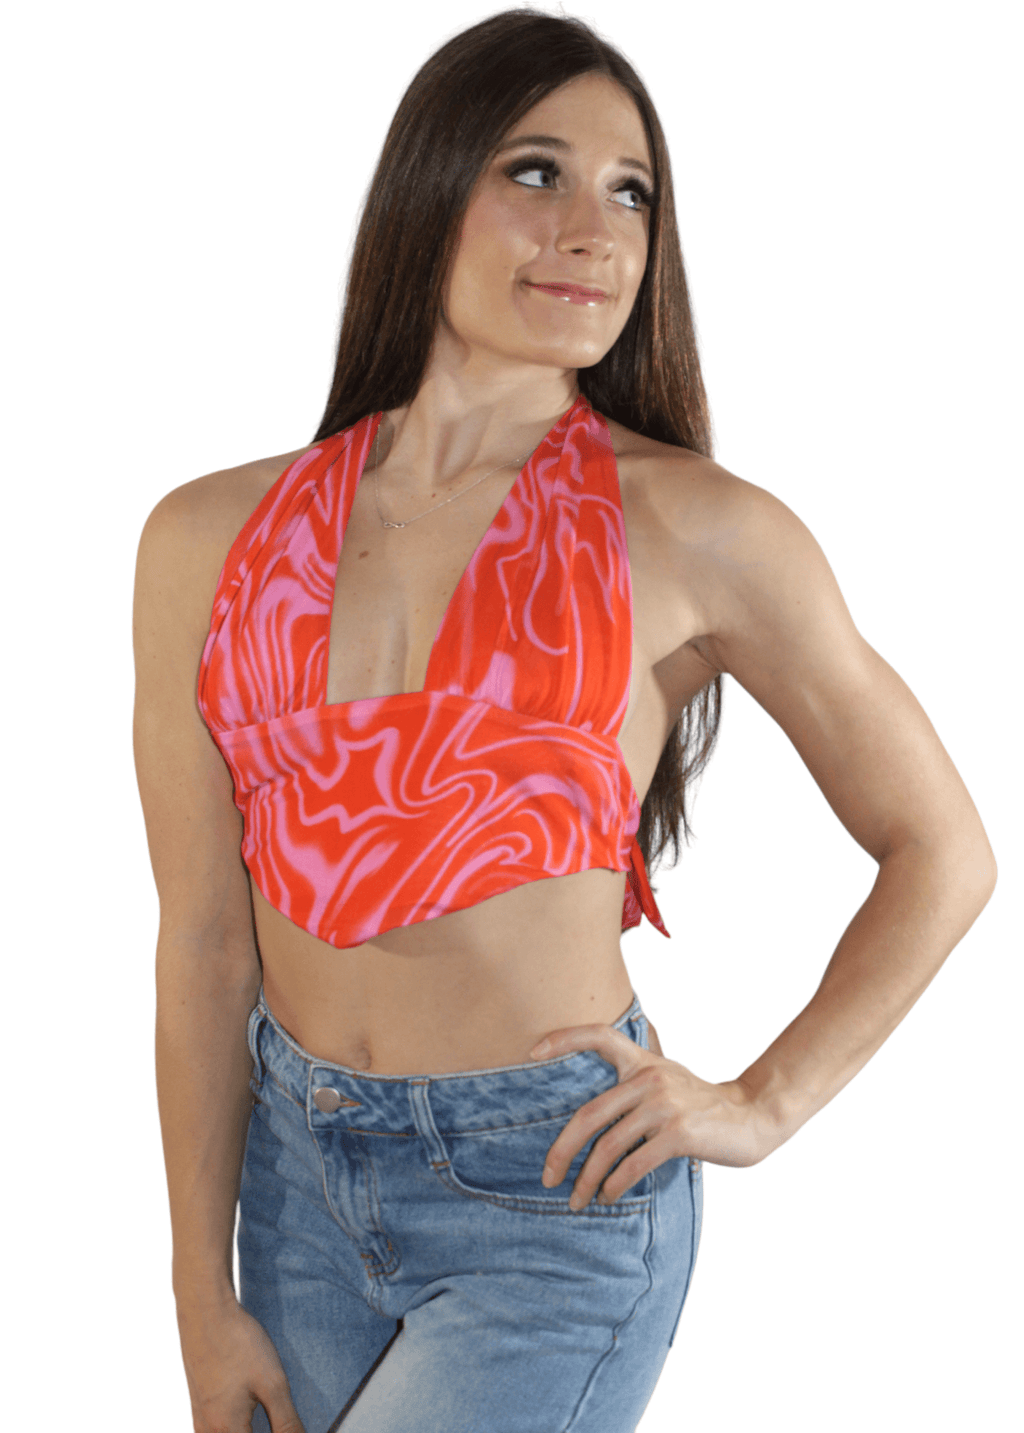 Spicy swirl halter top - Emily Reese Boutique